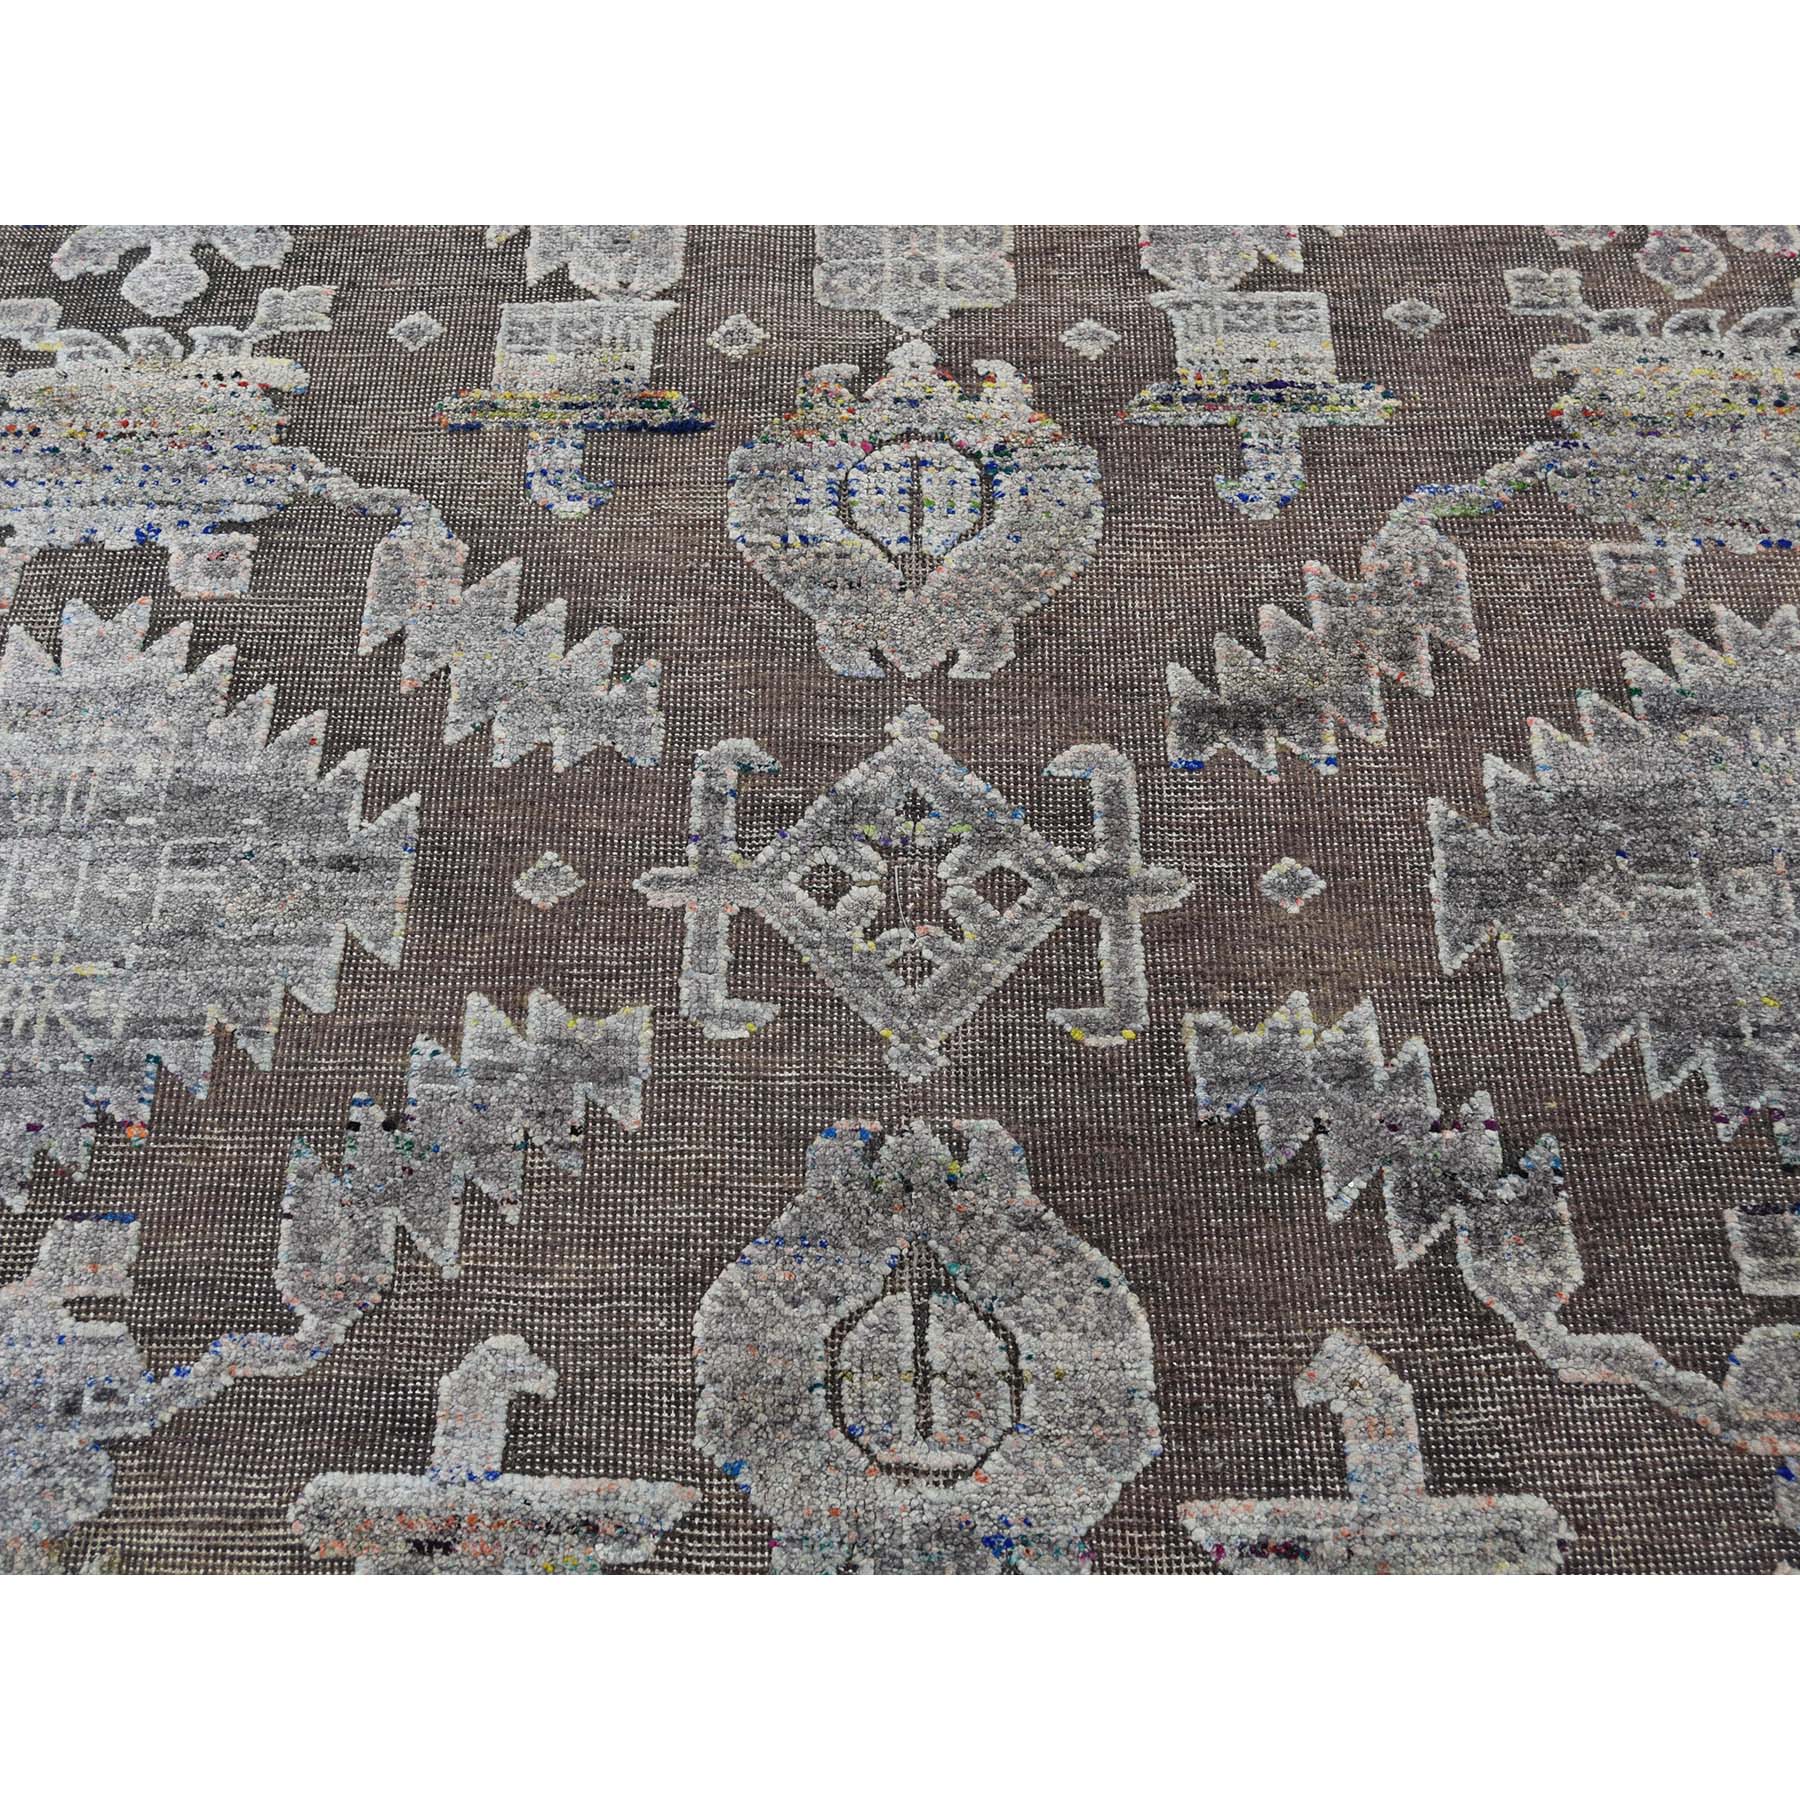 8-10 x12- Chocolate Brown Art Silk And Textured Wool Hand-Knotted Oriental Rug 